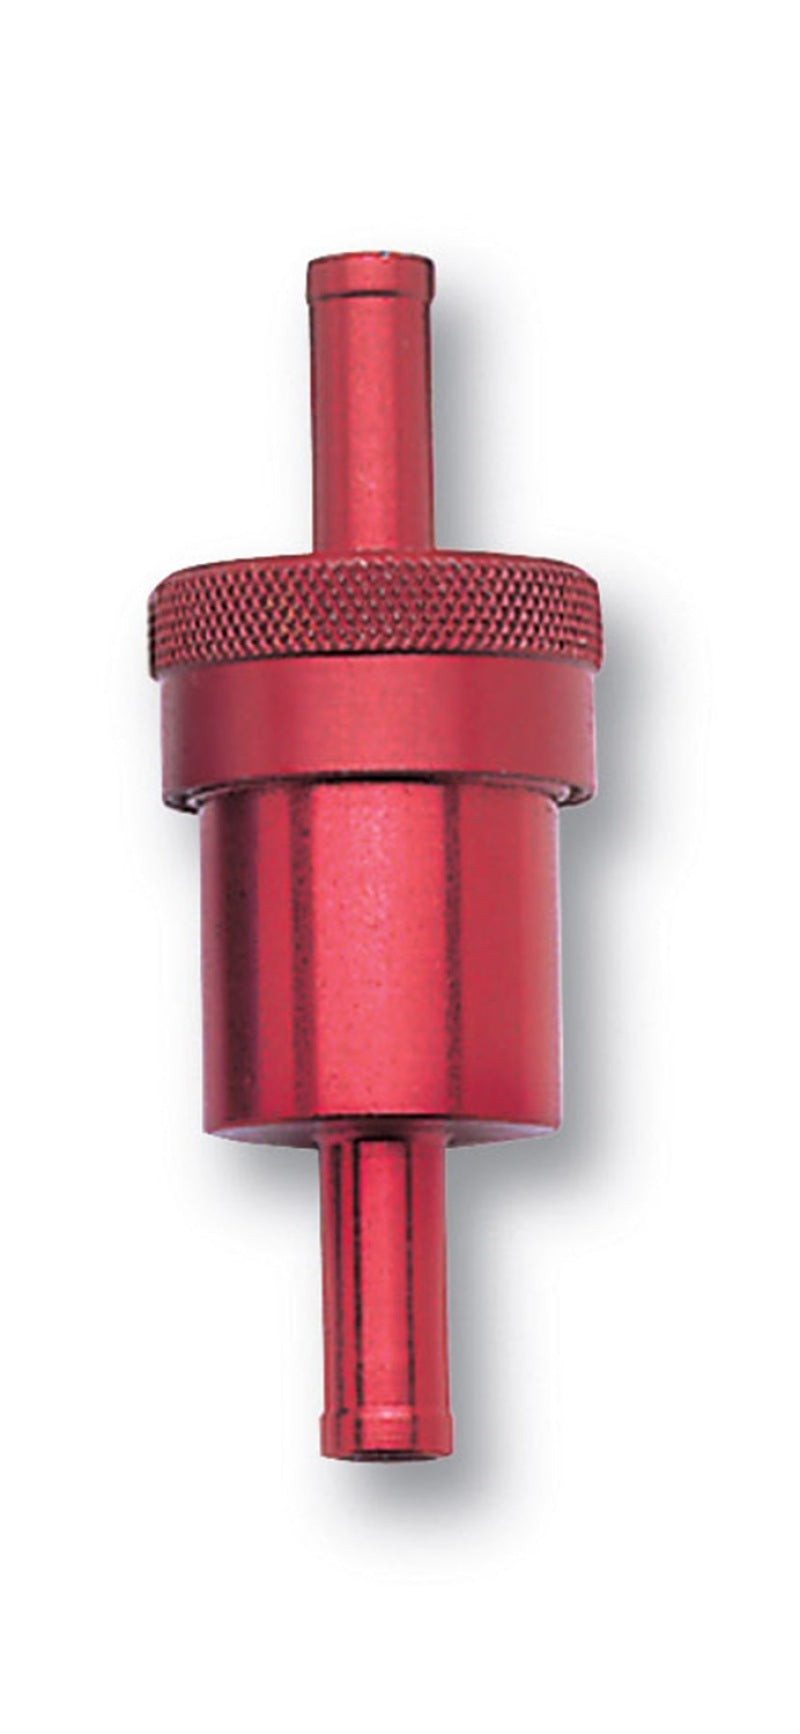 Russell Performance Red Street Fuel Filter (3in Length 1-1/8in diameter 3/8in inlet/outlet)